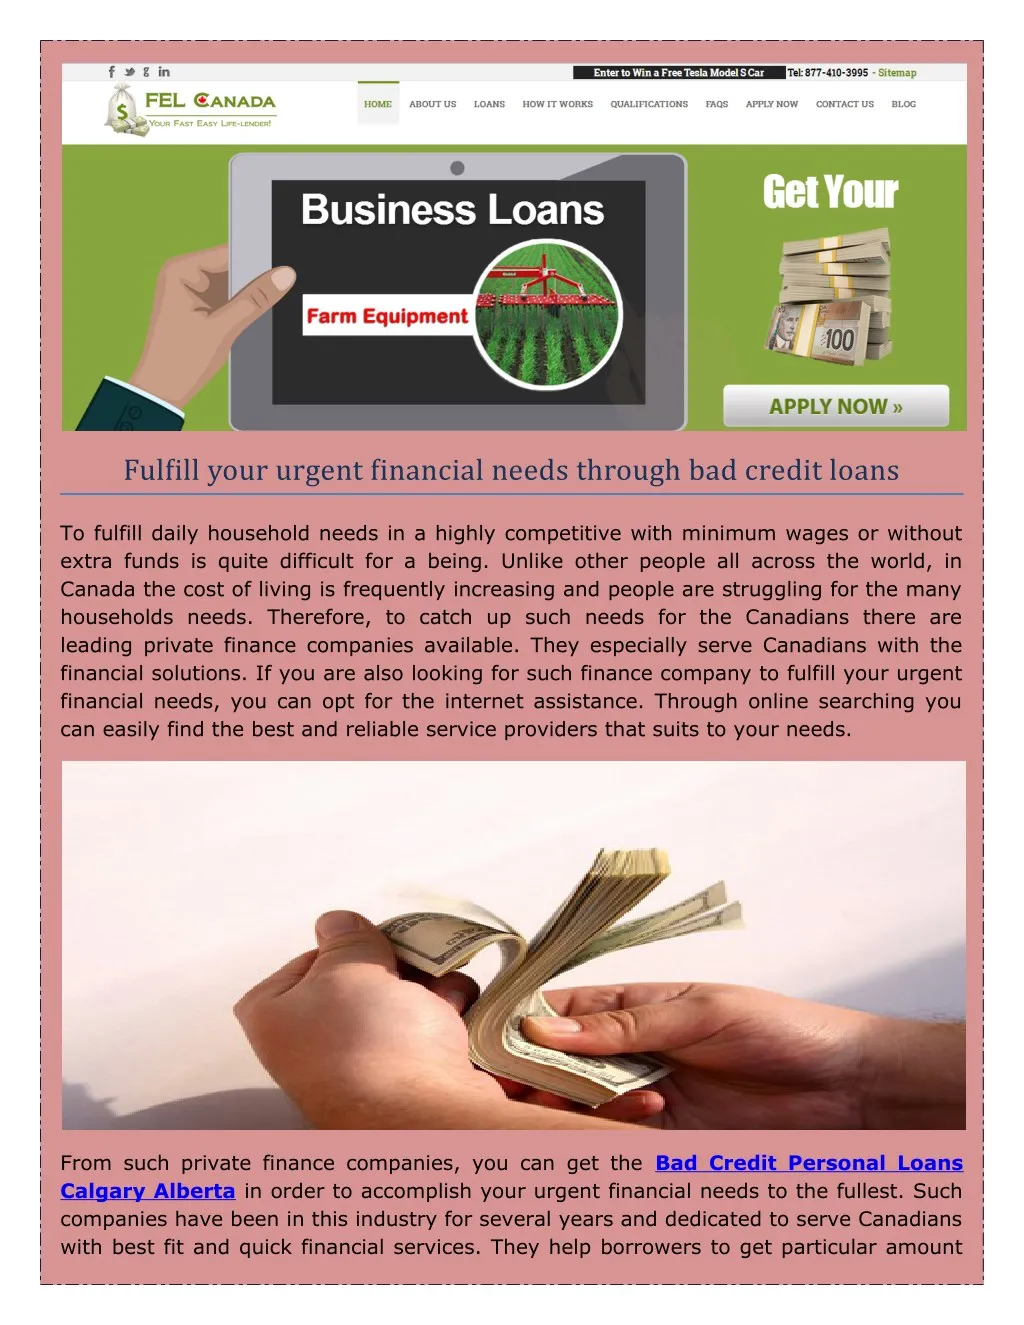 fulfill your urgent financial needs through